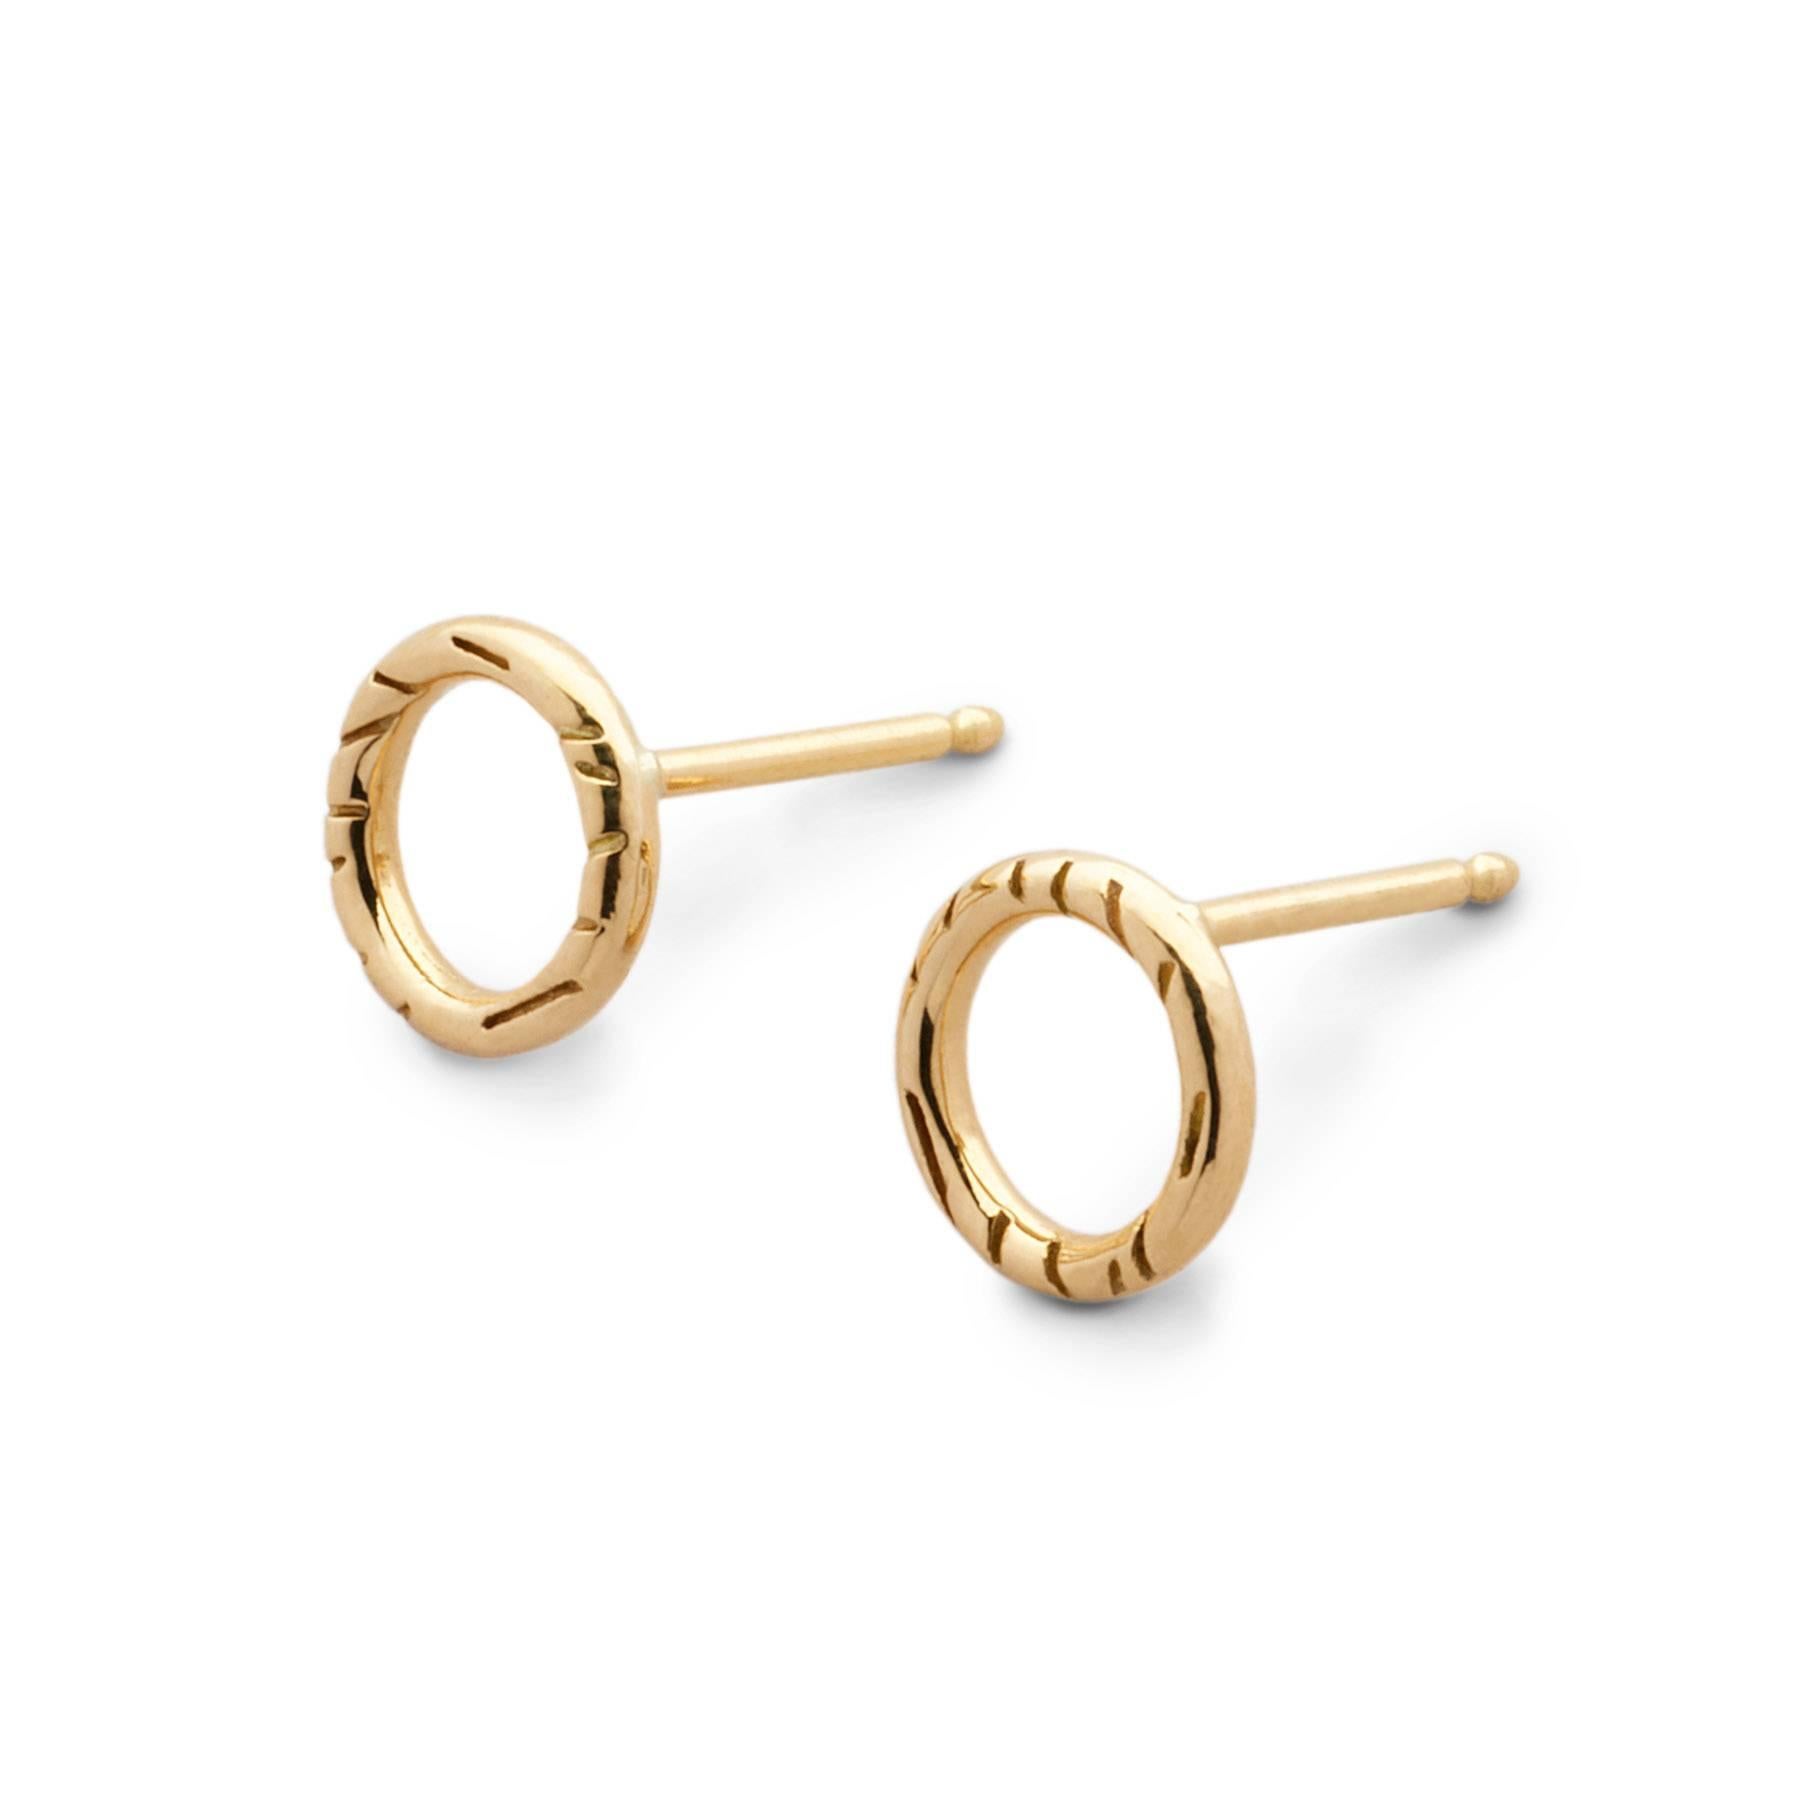 18ct yellow gold hoop earstuds with fur texture engraving
Post and butterfly fittings
Open circle measures 9mm
Made in London

Classic and elegant, these earstuds compliment everyday wear and pair with any of the Open Circle items from the